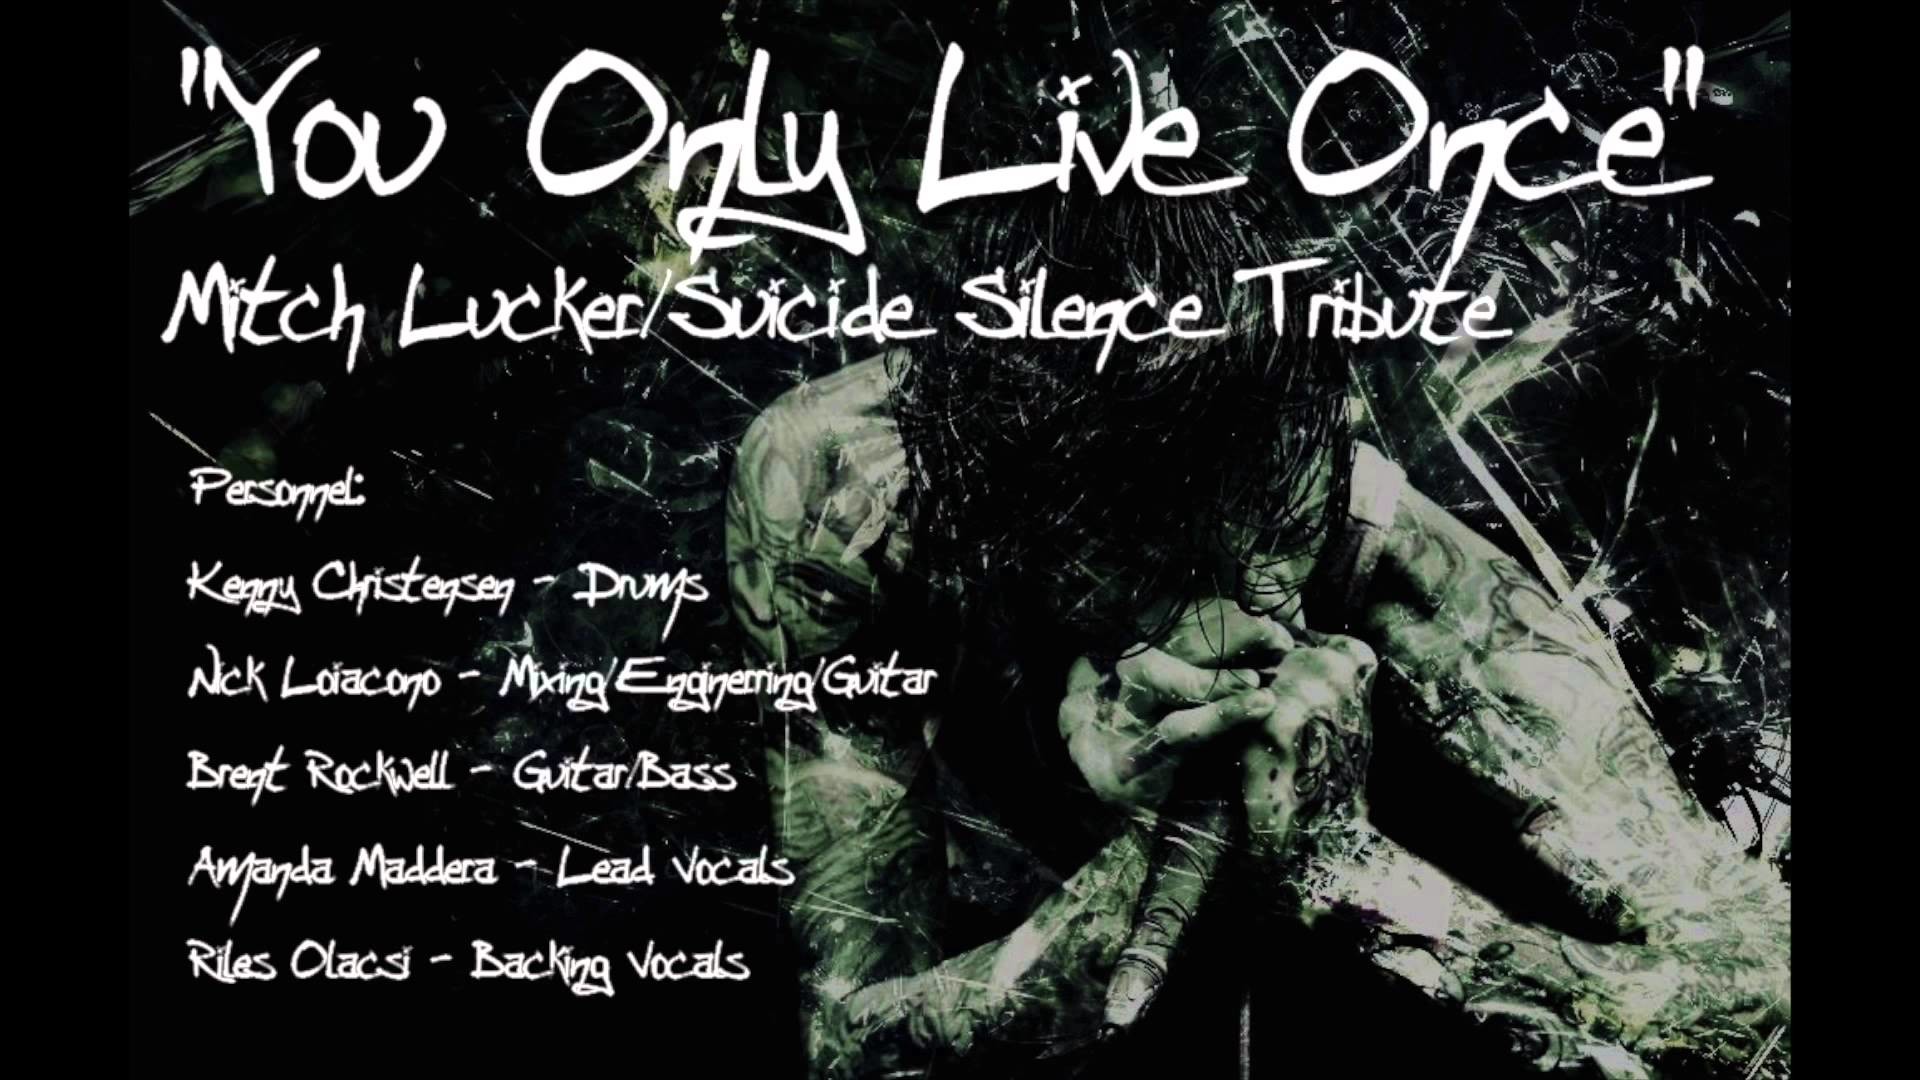 1920x1080 "You Only Live Once" Mitch Lucker/Suicide Silence Tribute